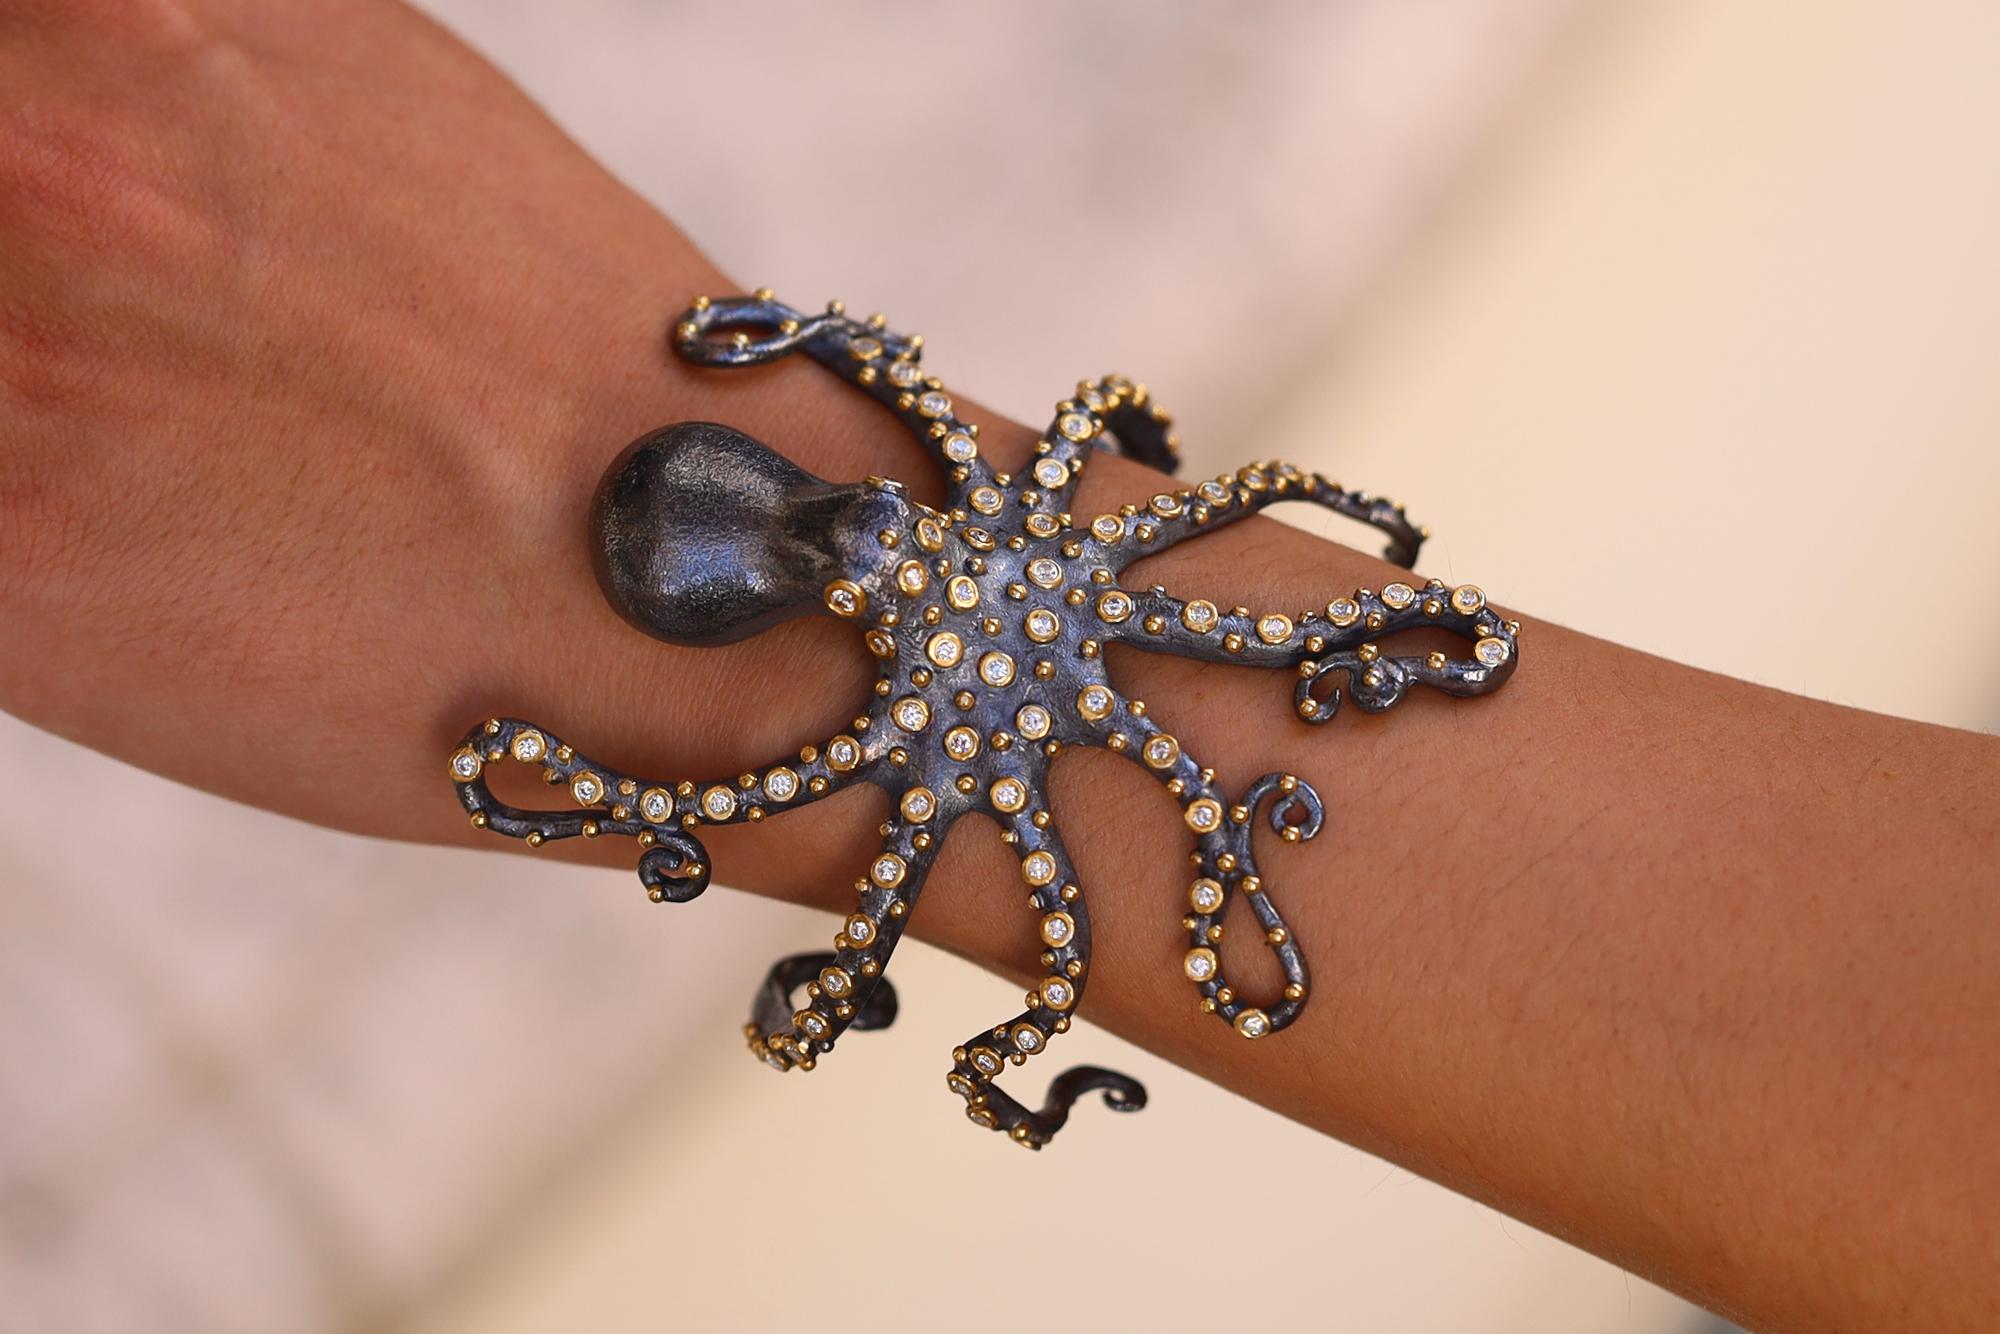 This outstanding octopus cuff bracelet adorned with diamond tentacles is artfully rendered in rich 24k gold and oxidized sterling silver 2 tone. Wrapping seductively around the wrist, this sea-life creature has piercing colorless diamond eyes and